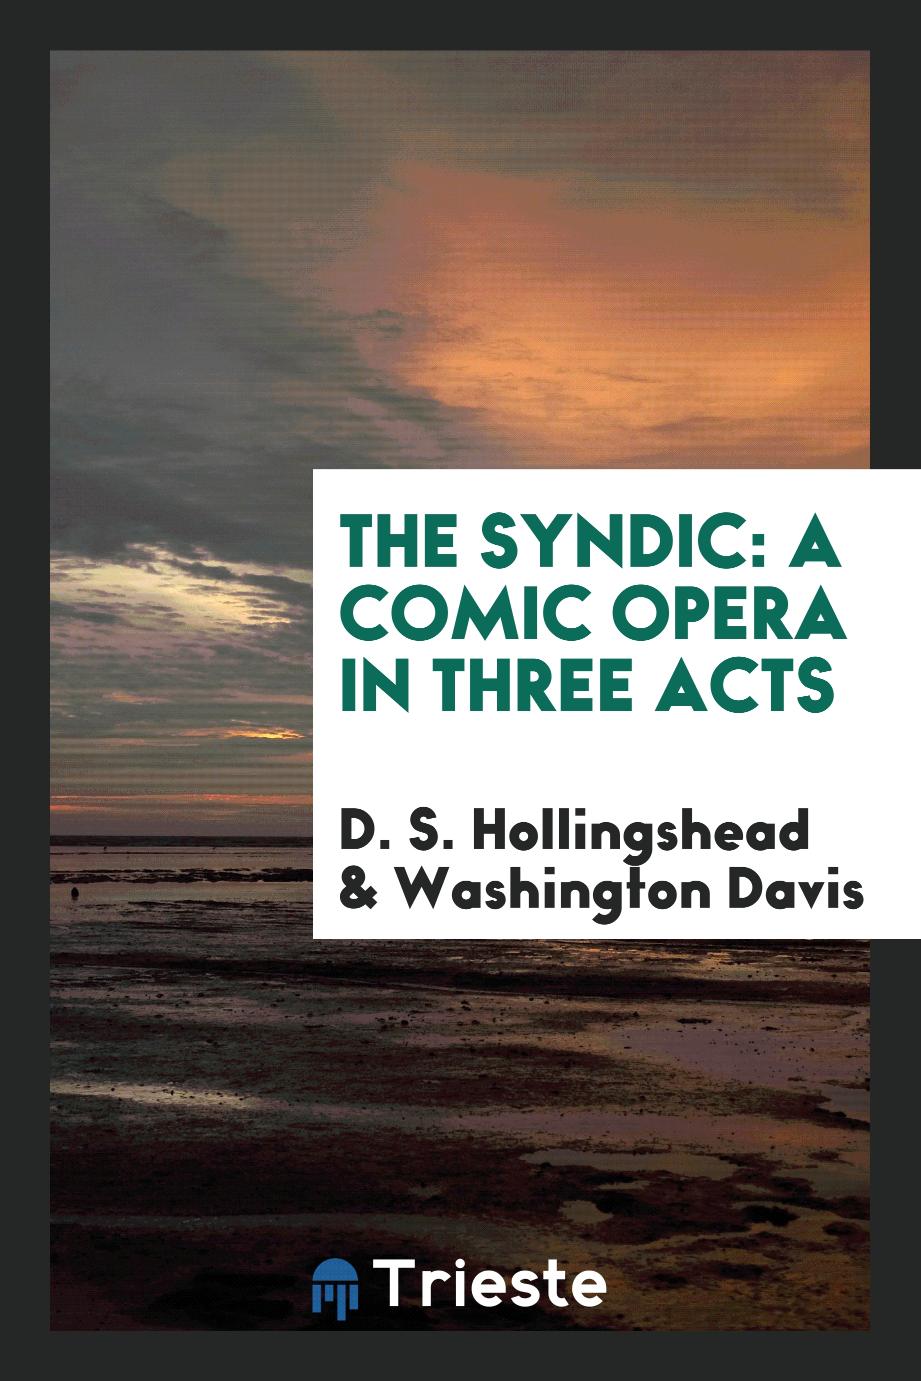 The Syndic: A Comic Opera in Three Acts